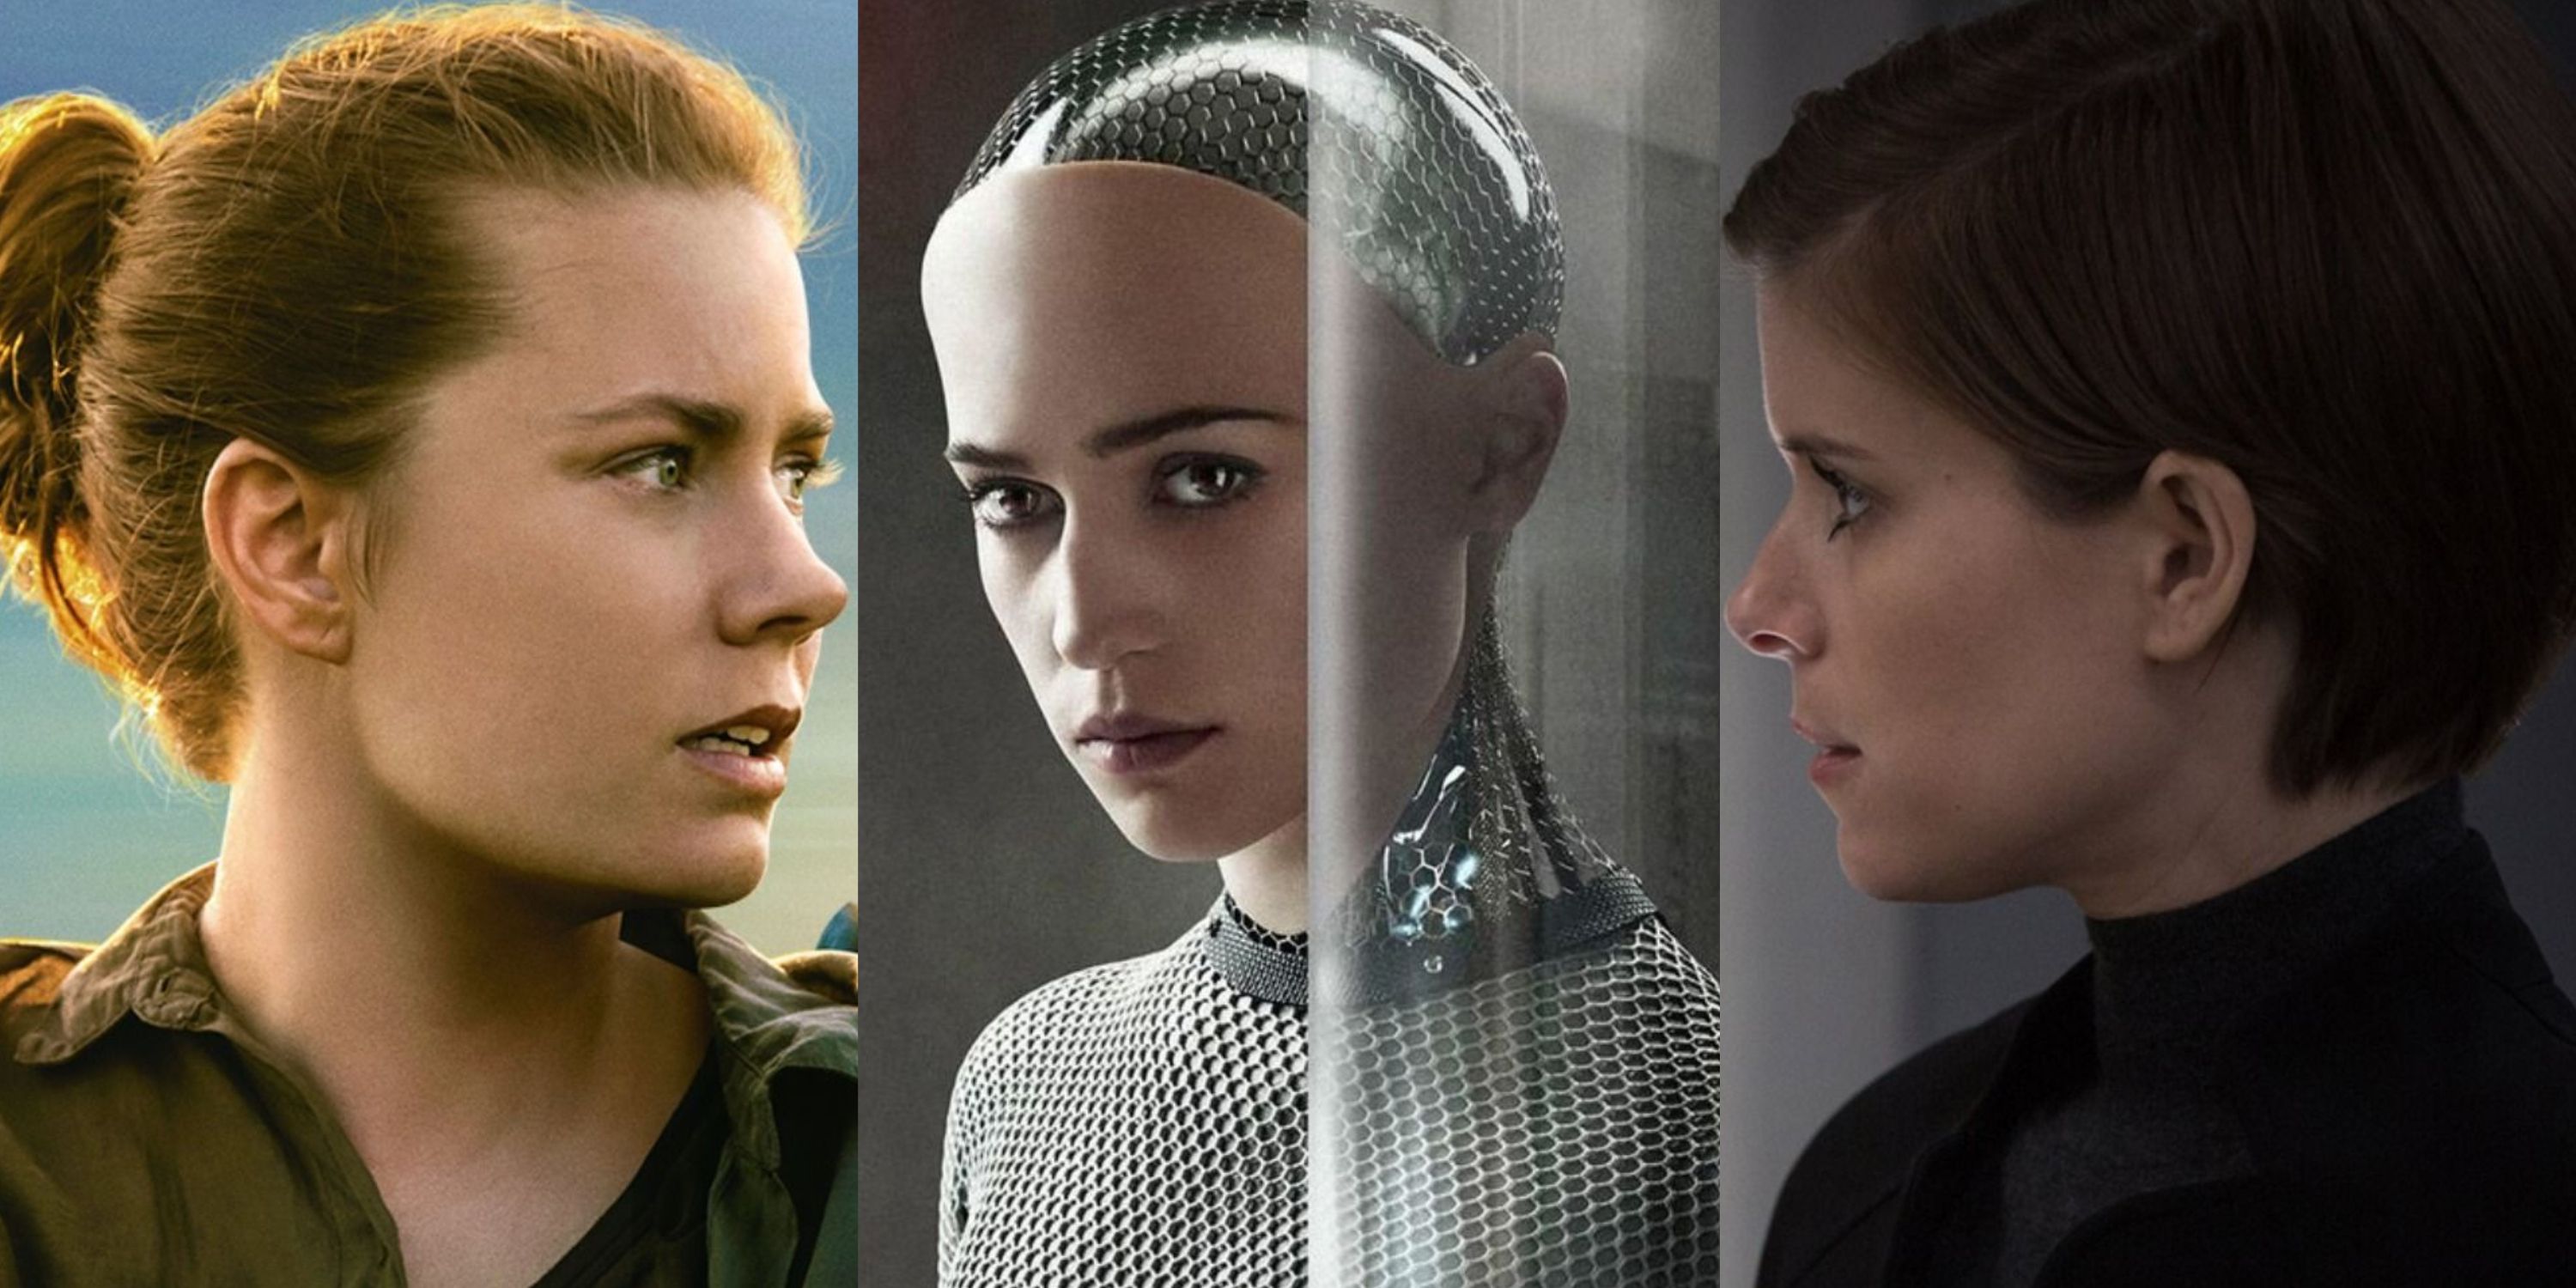 Split image of main characters from Arrival, Ex Machina, and Morgan